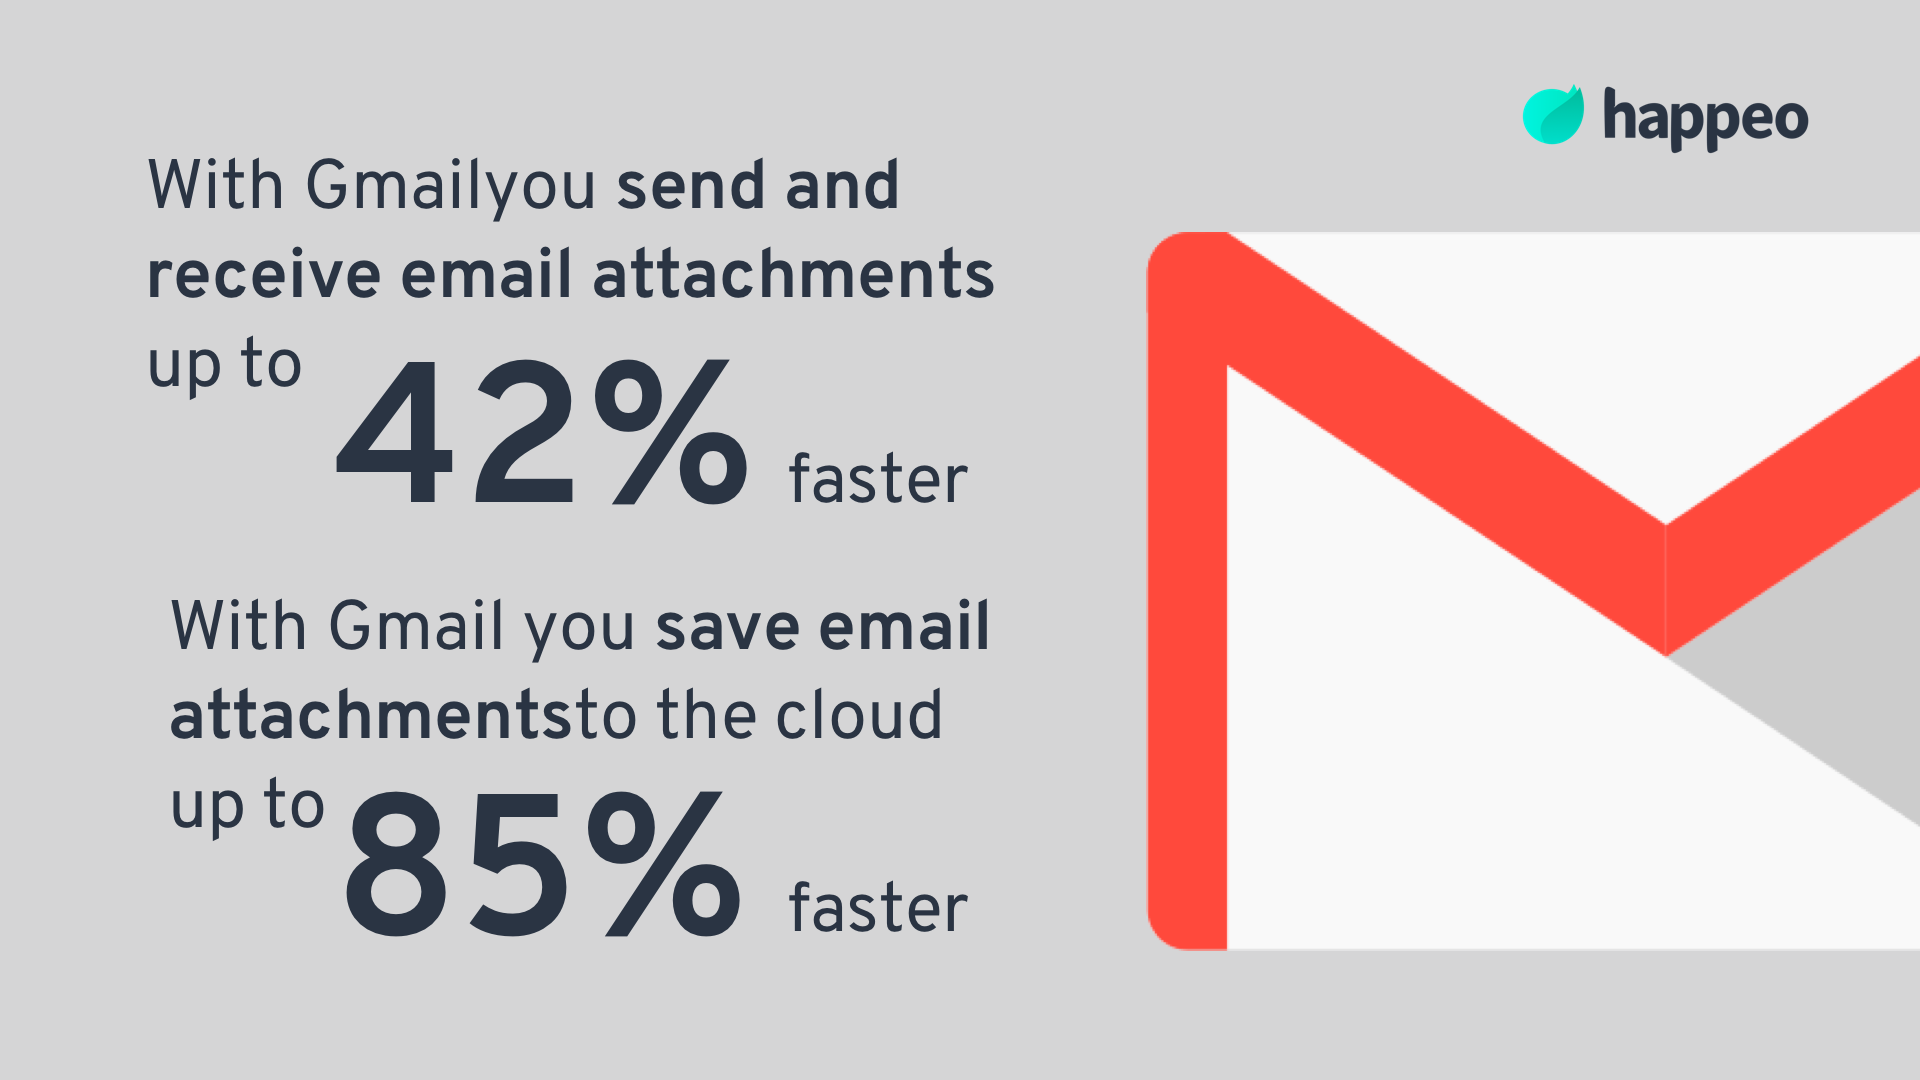 With Gmail you save email addtachments to the cloud up to 85% faster